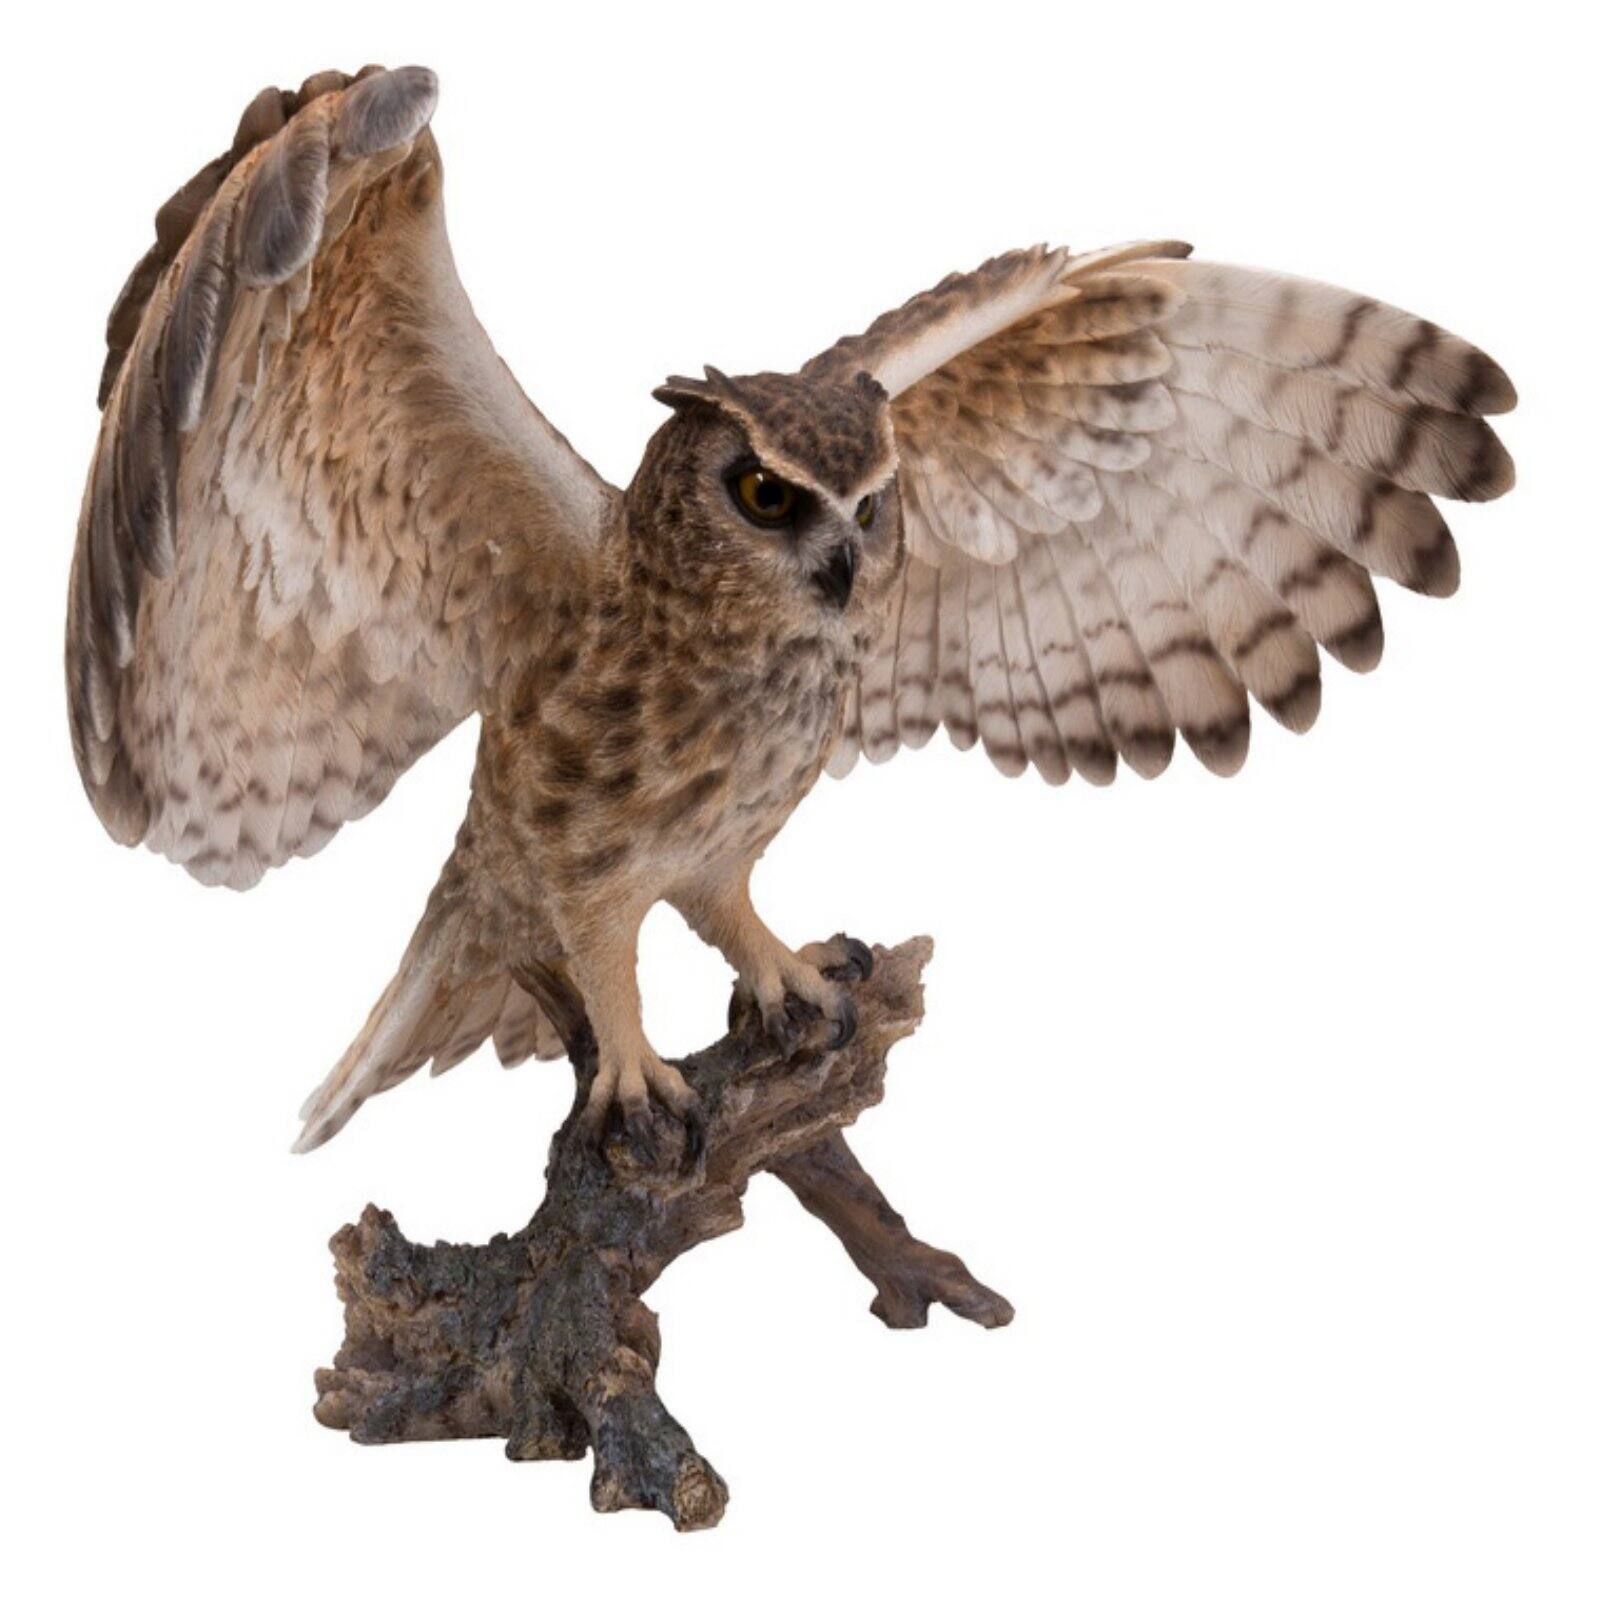 HI-LINE GIFT LTD. EAGLE OWL ON BRANCH W/WINGS OUT - image 2 of 5